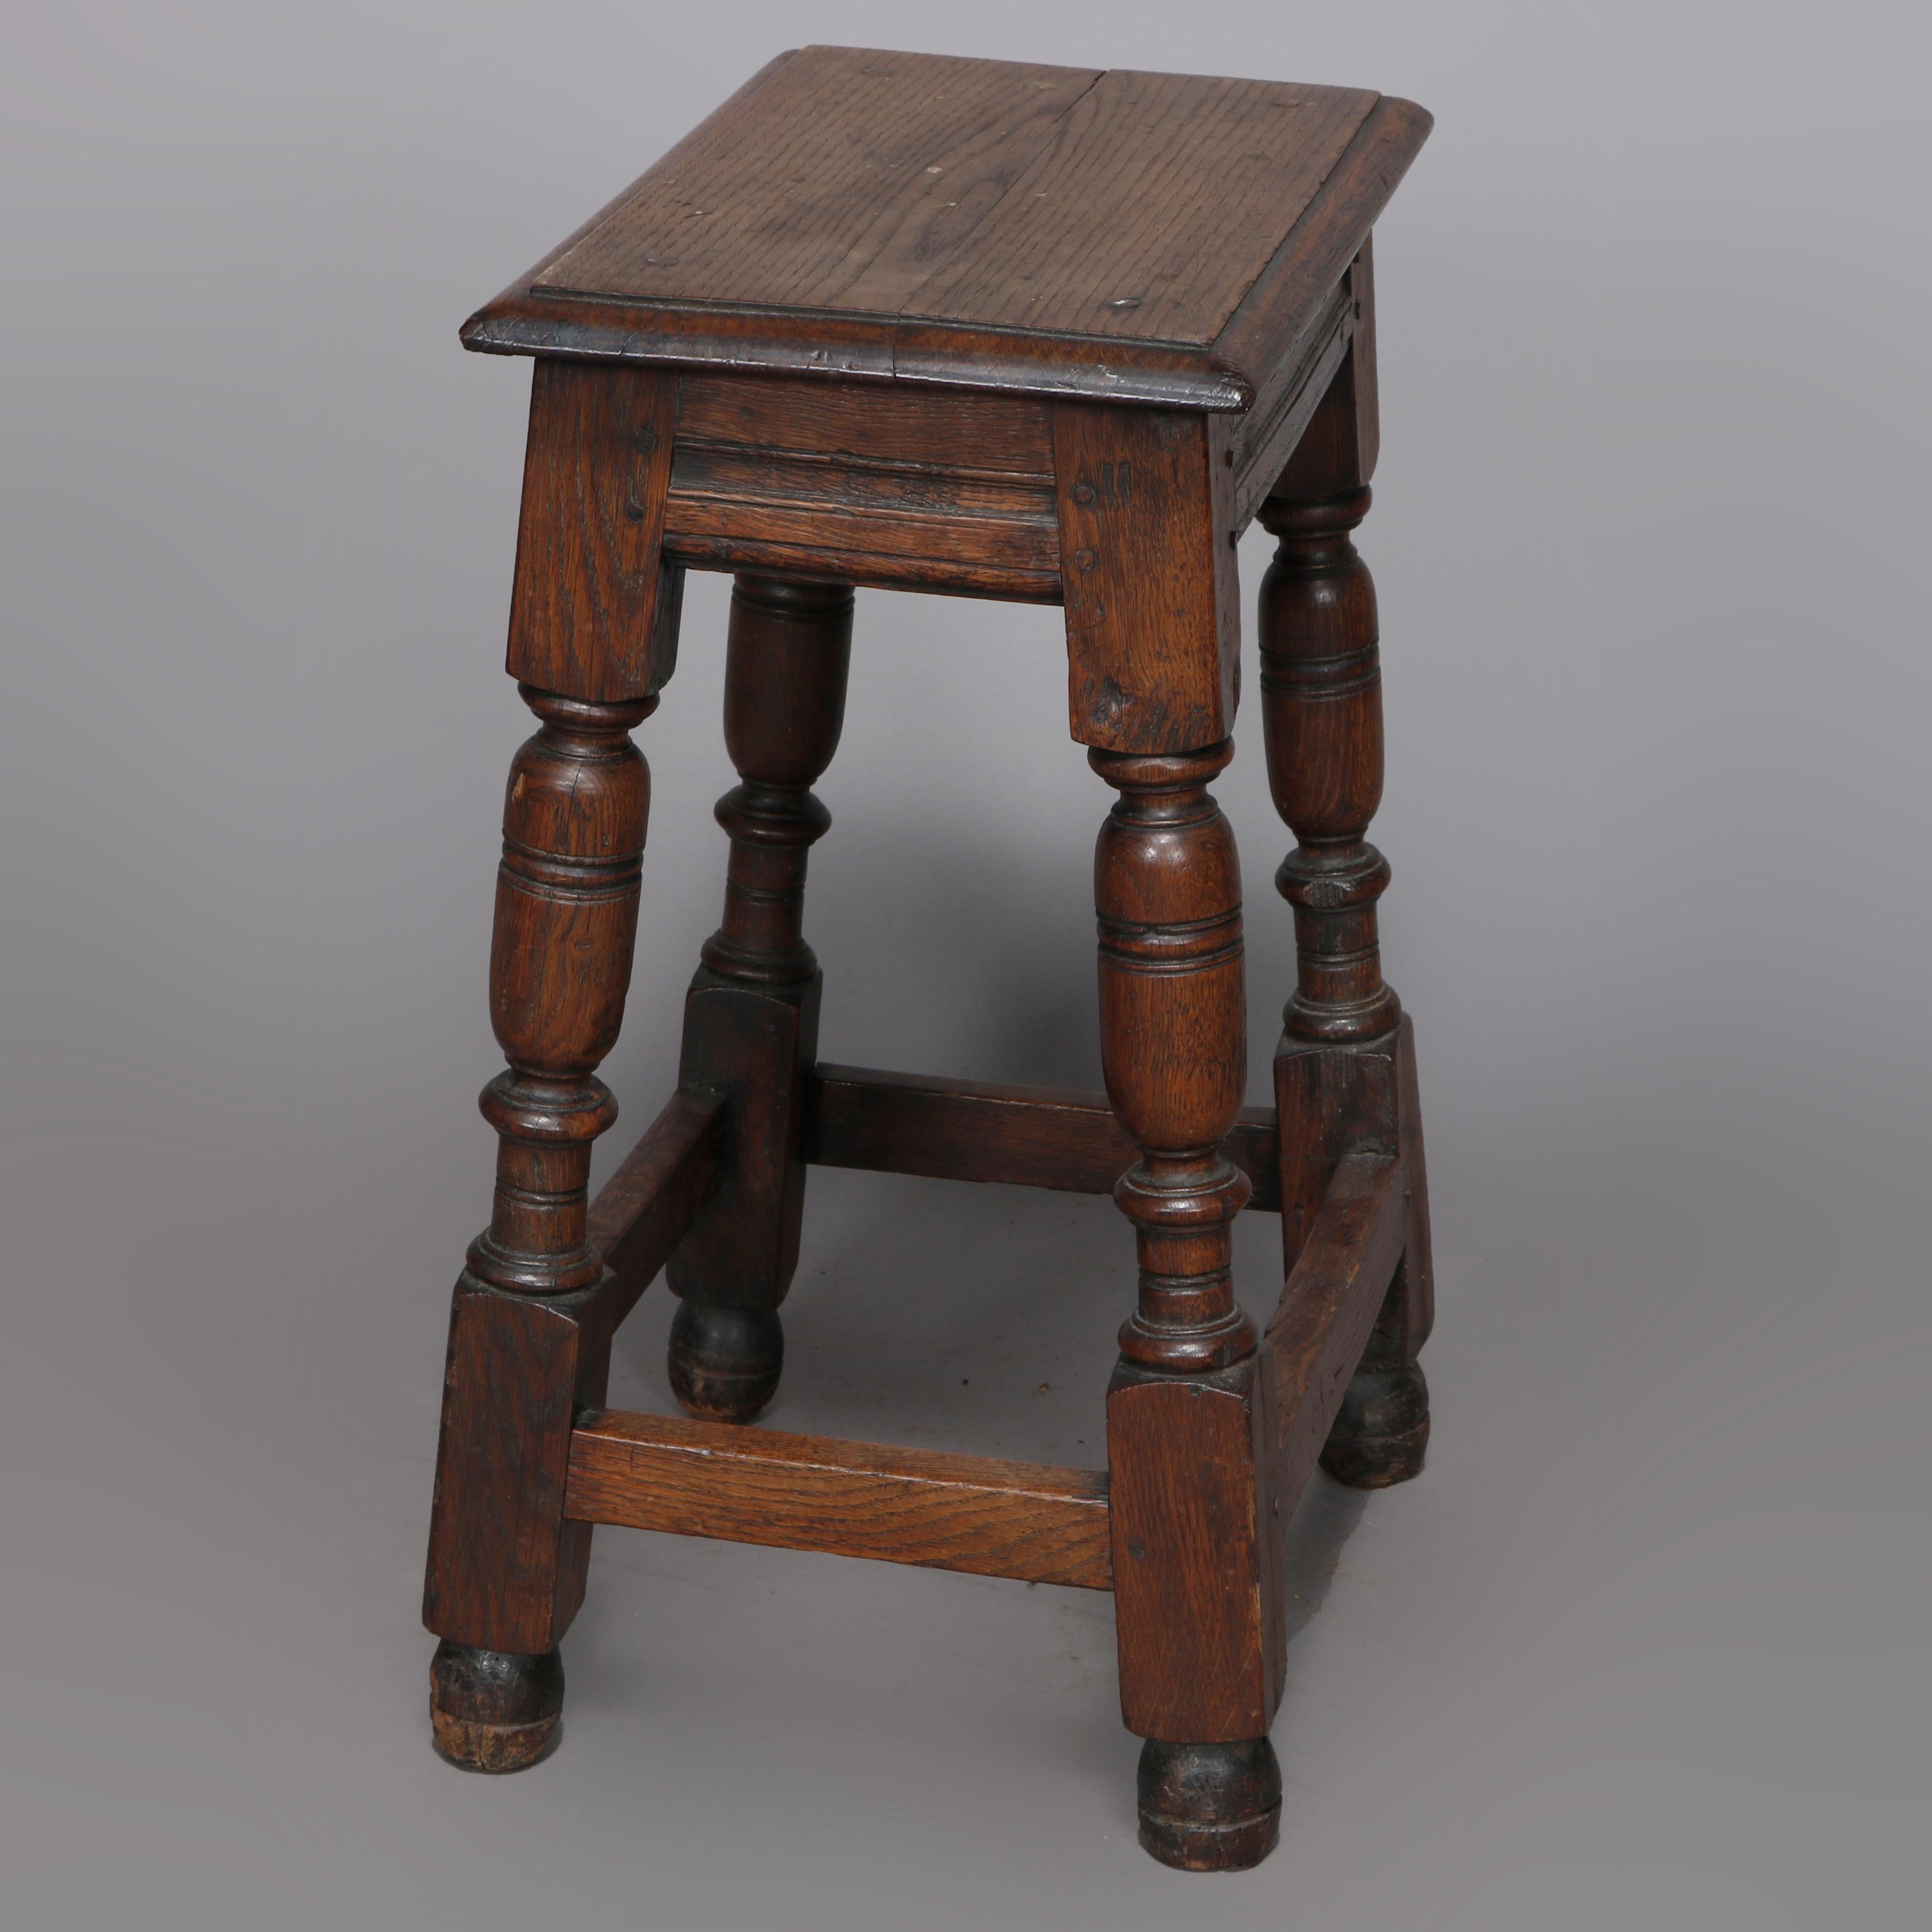 18th Century and Earlier Antique English Jacobean Carved Oak Side Stand or Stool, 18th Century